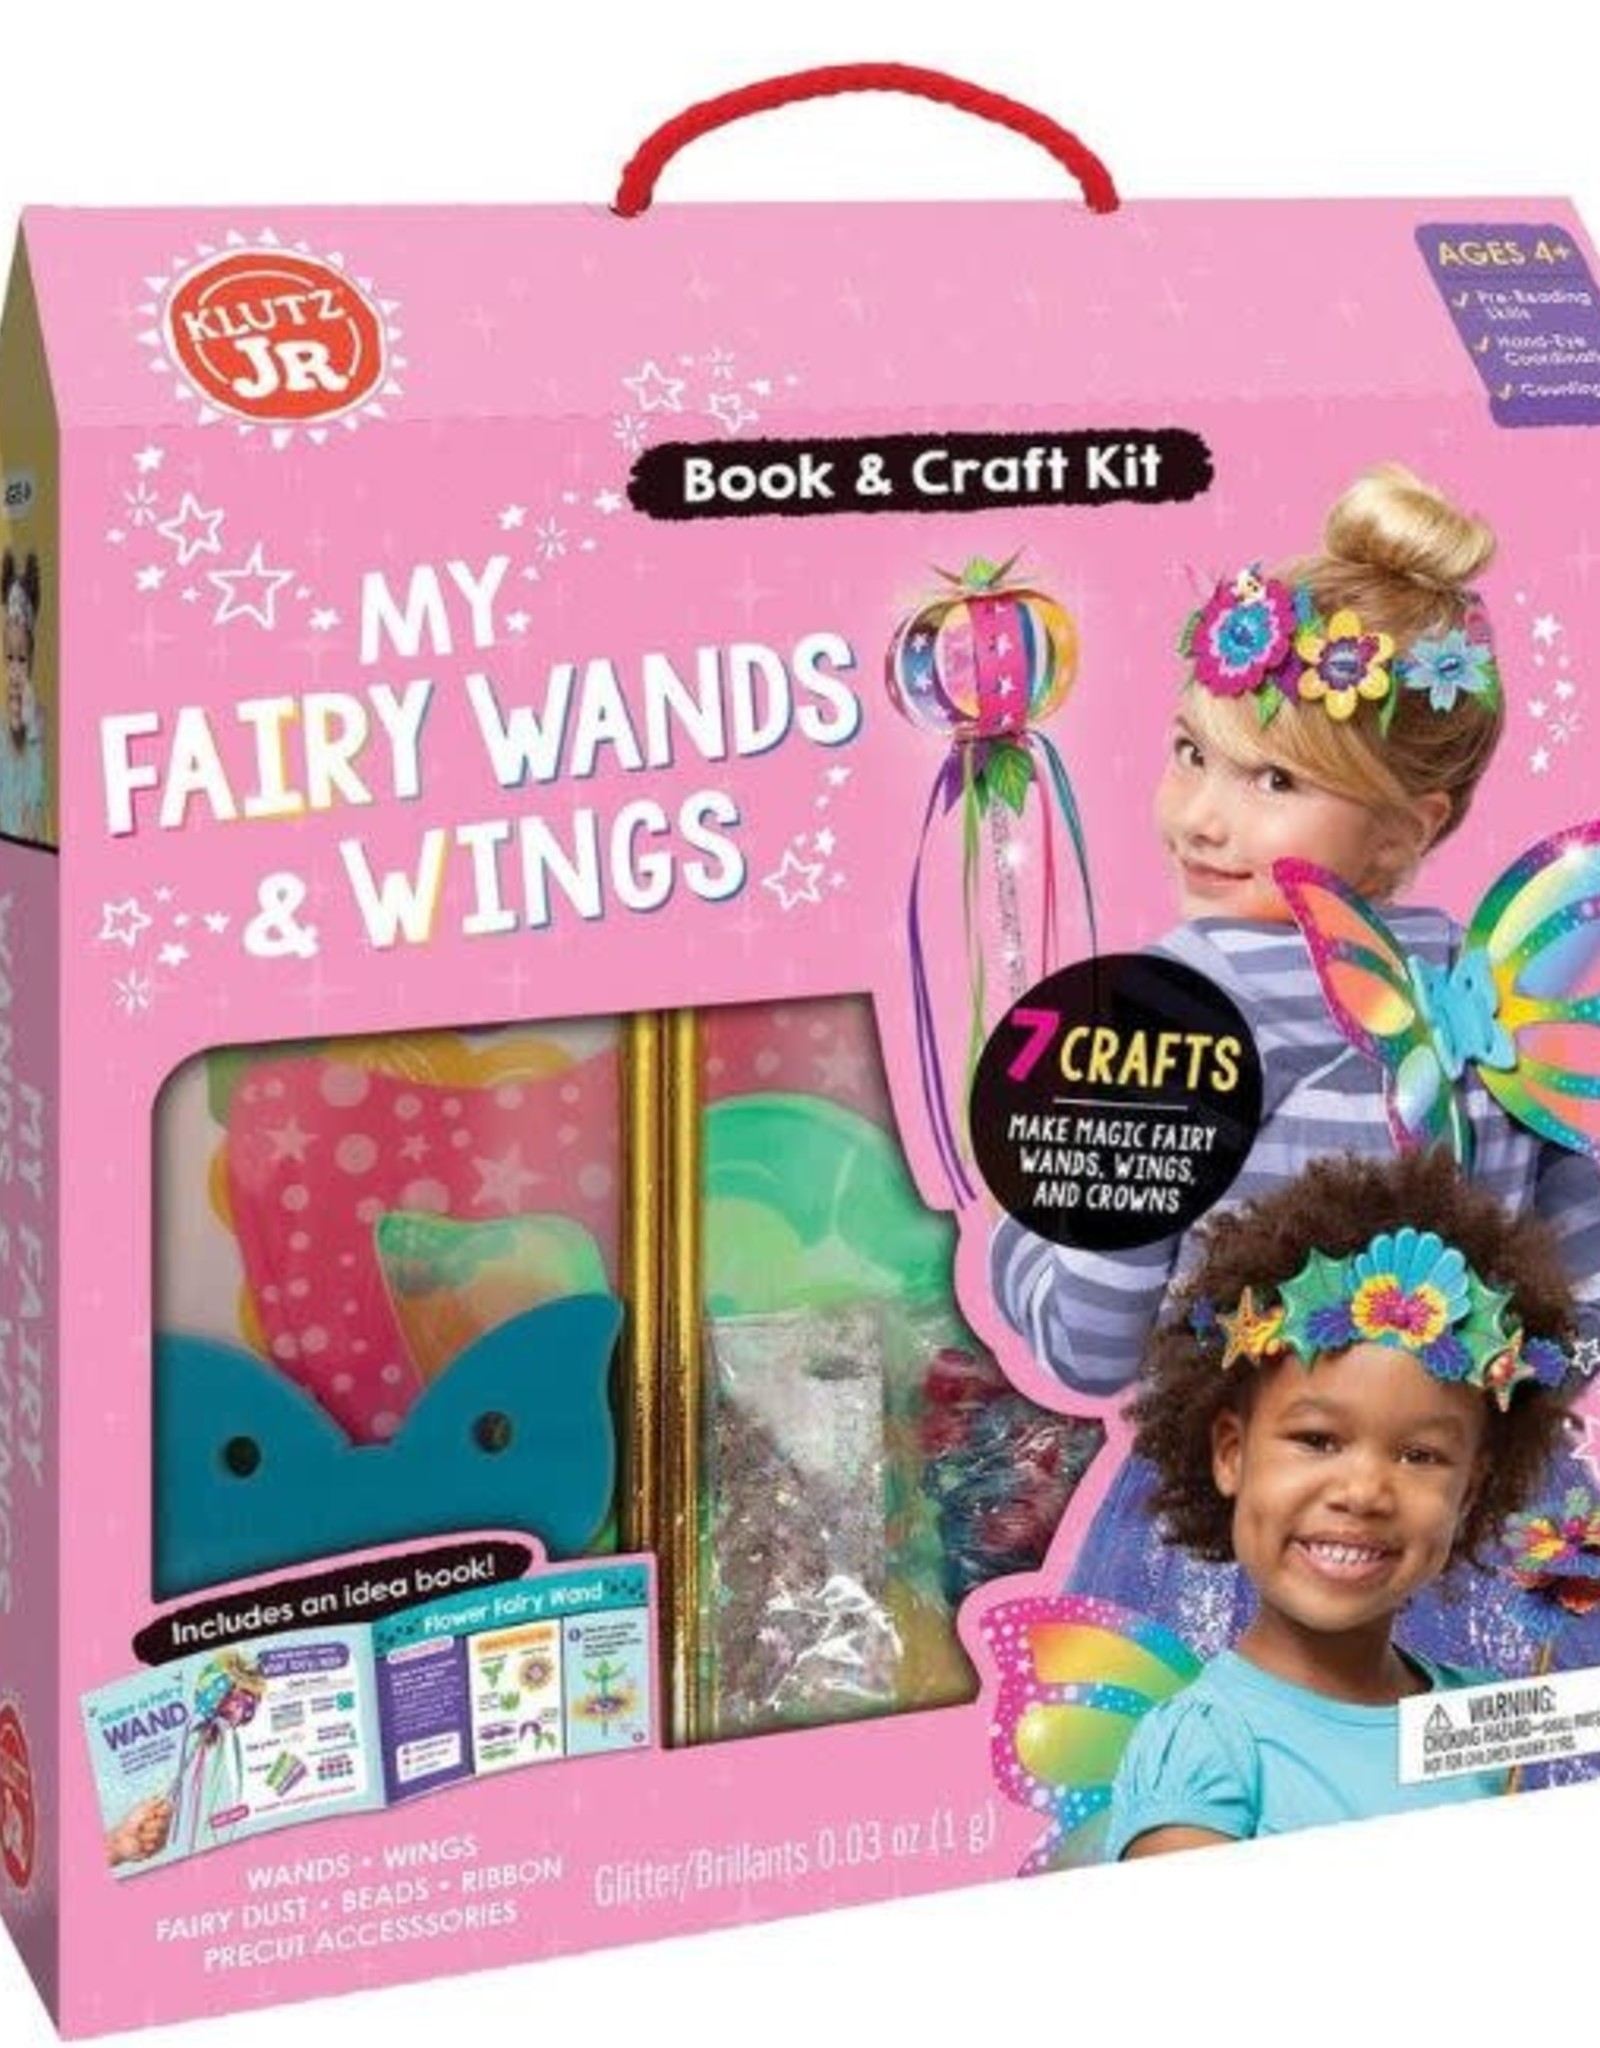 Klutz My Fairy Wands & Wings